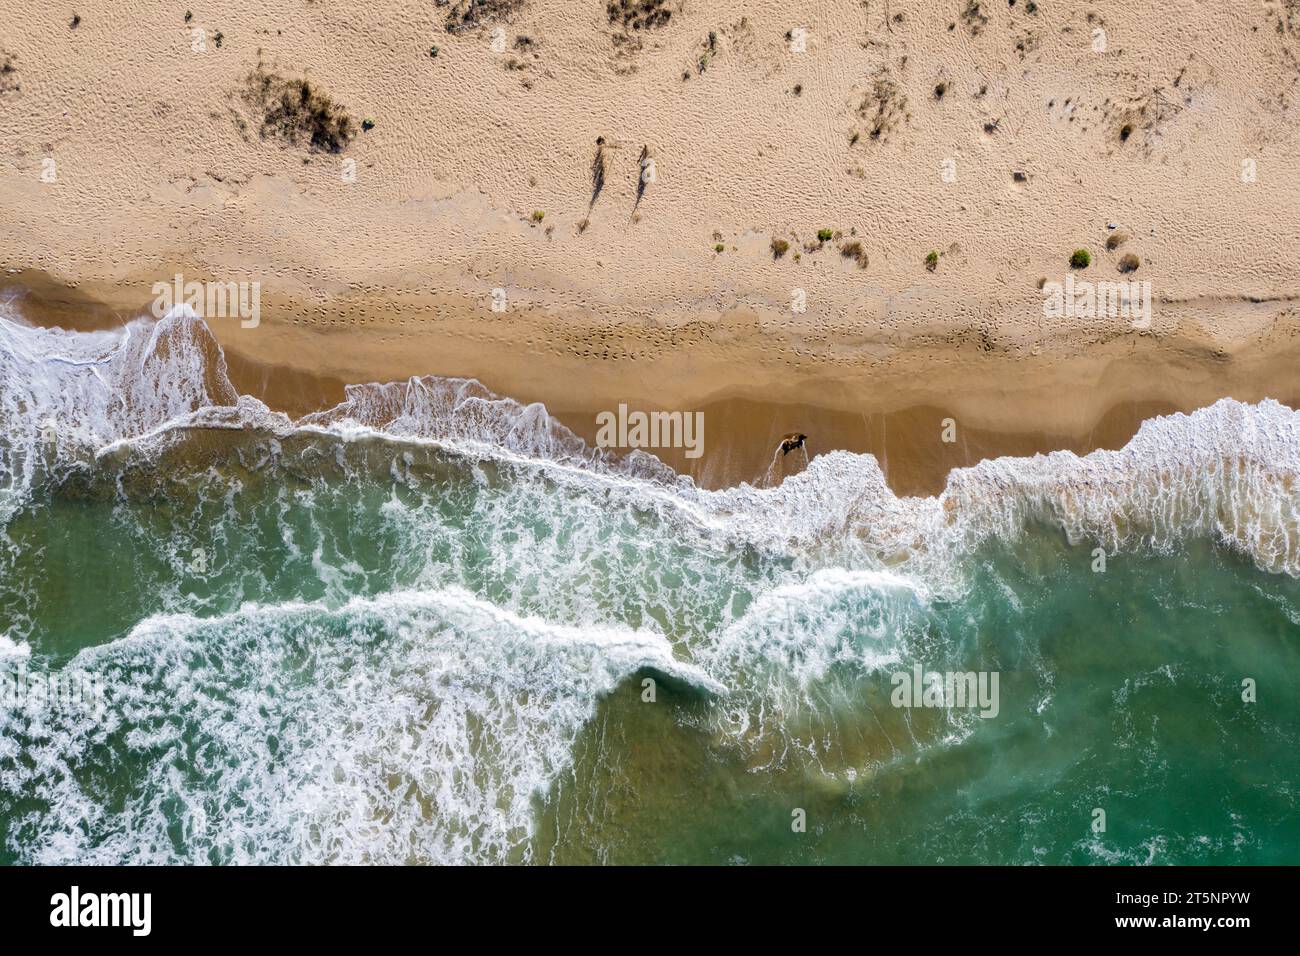 Aerial view of ocean waves washing a secluded sandy shoreline beach Stock Photo